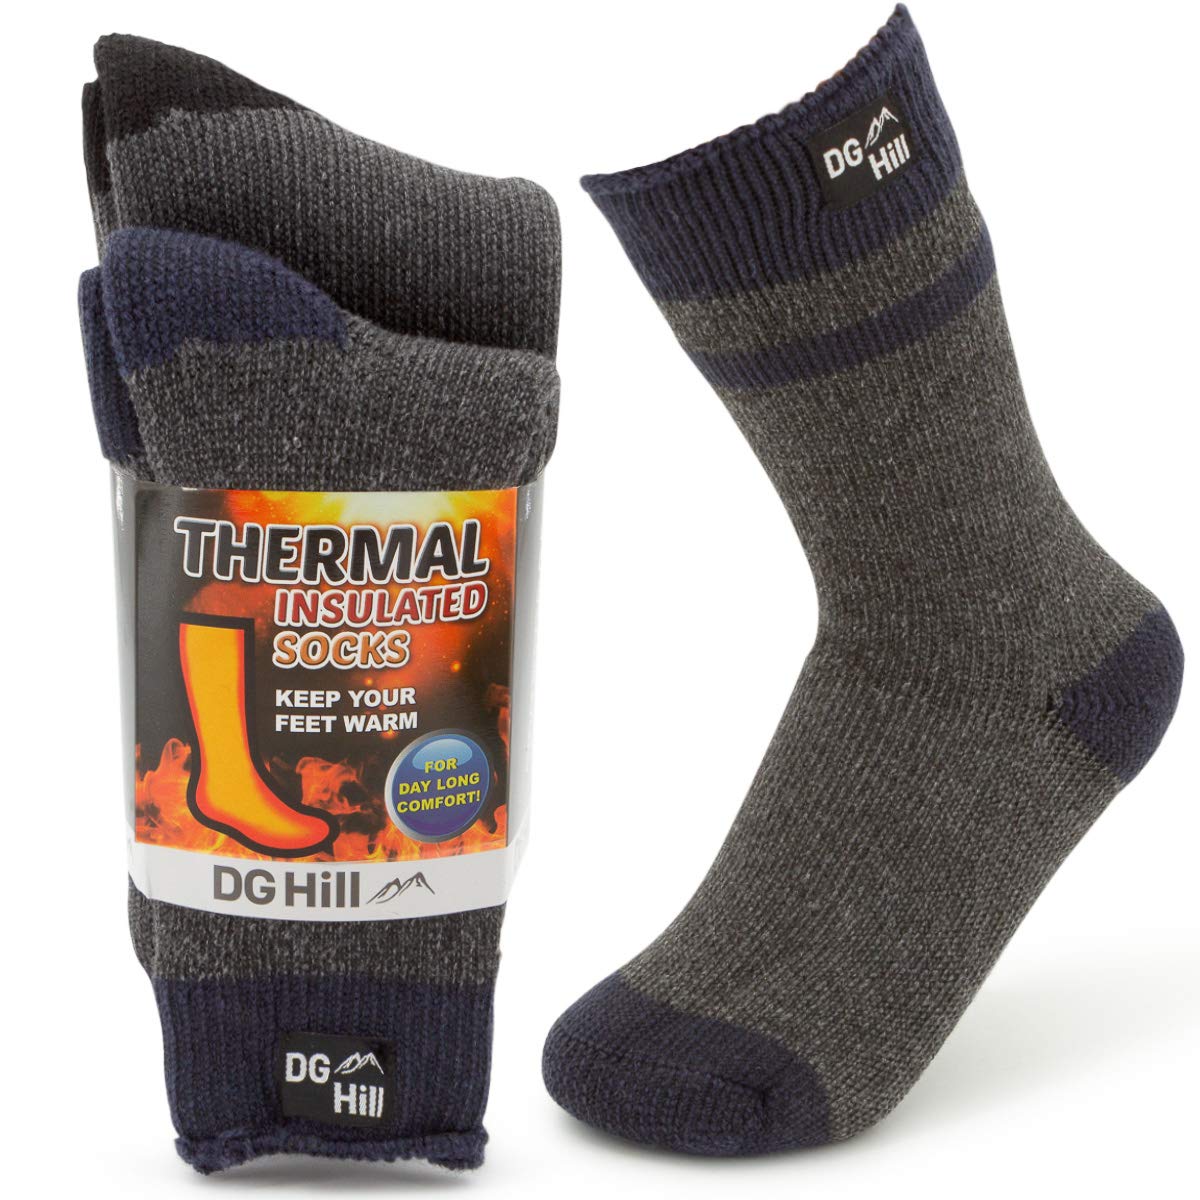 DG Hill (2pk or 4pk Kids Thermal Winter Socks, Thick Insulated Heated Boot Socks for Cold Weather, Girls and Boys